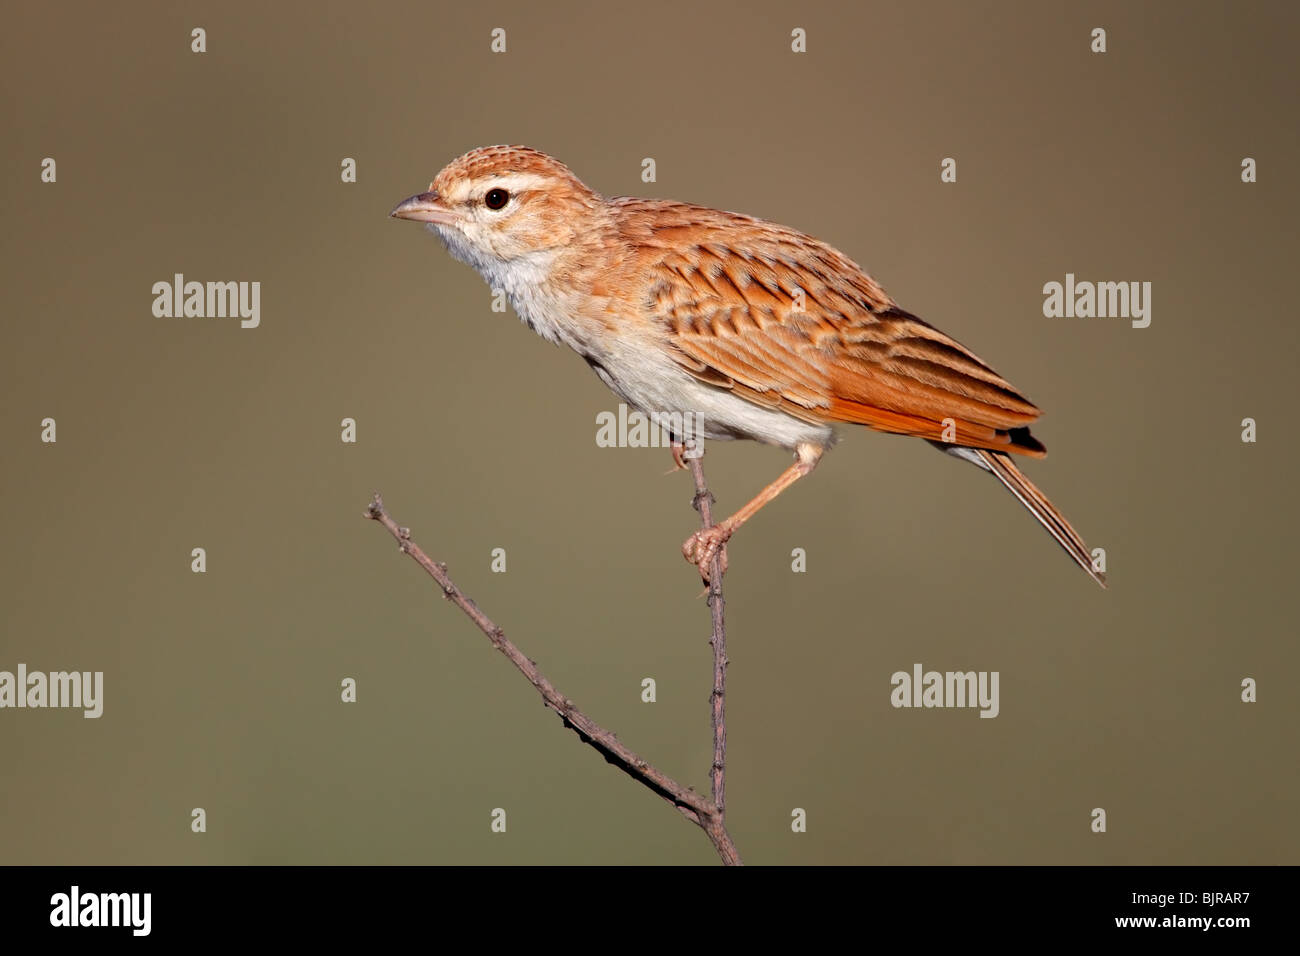 A fawn colored lark (Mirafra africanoides) perched on a twig, Kgalagadi Transfrontier Park, South Africa Stock Photo